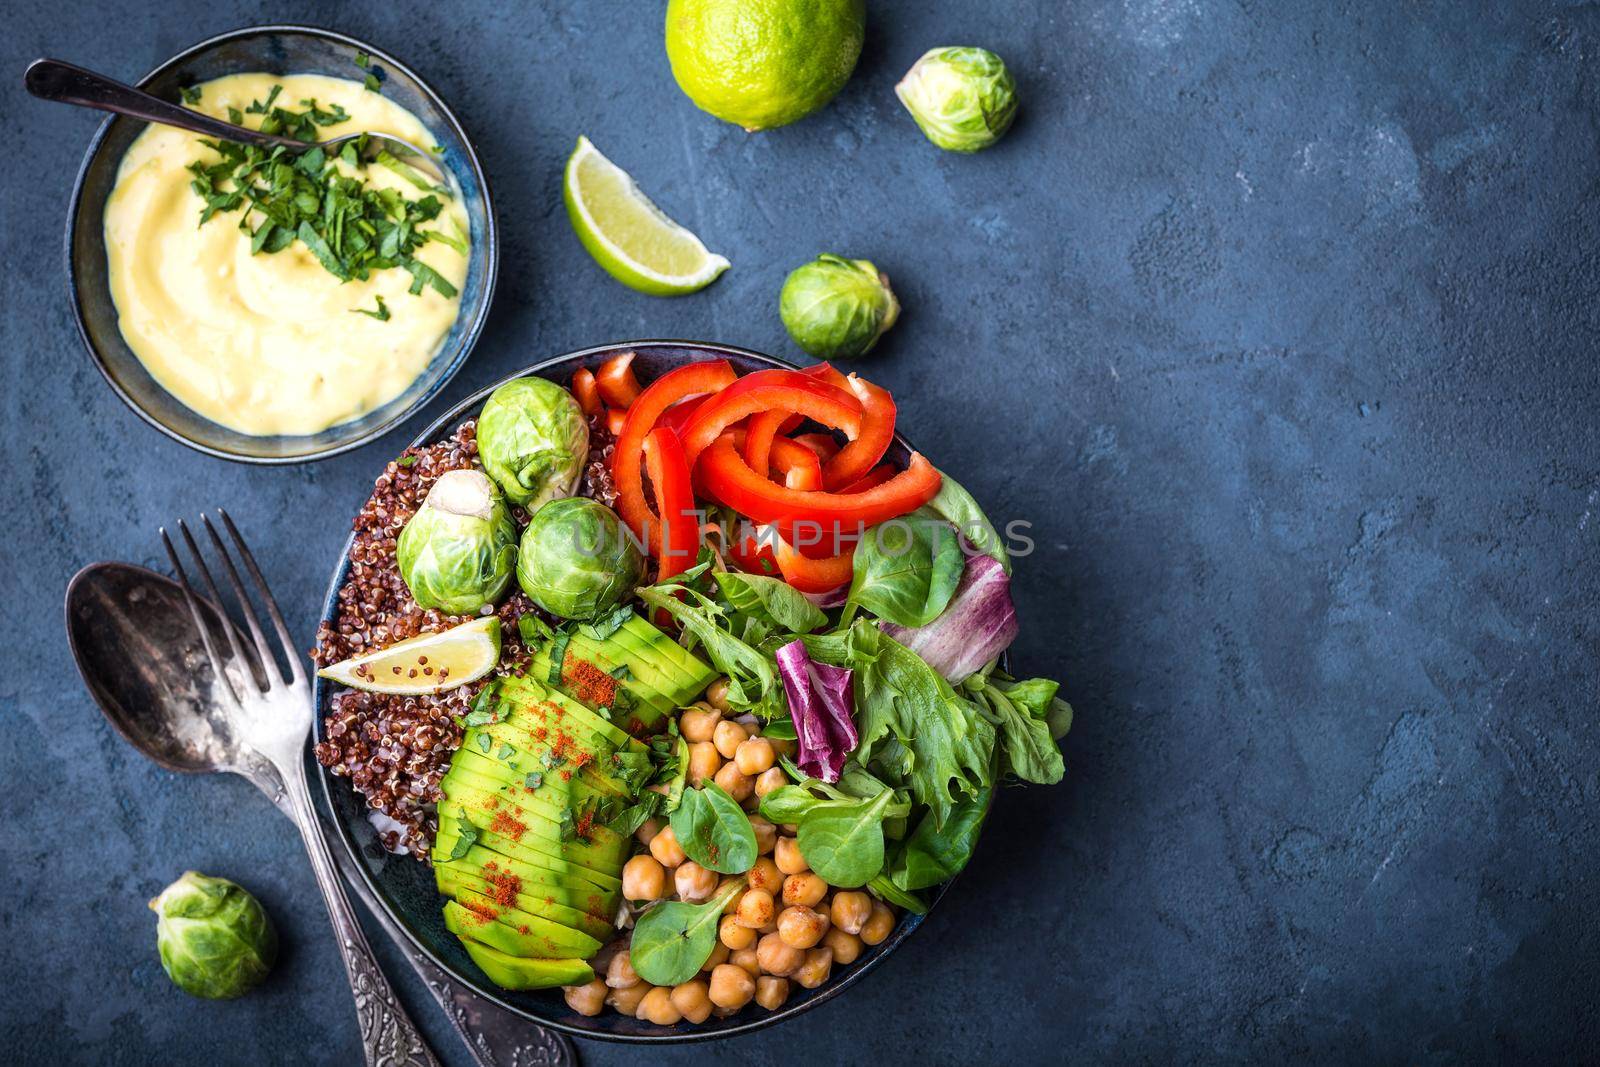 Bowl with healthy salad, dip, blue stone background. Top view. Space for text. Buddha bowl with chickpea, avocado, quinoa seeds, red bell pepper, fresh spinach, brussels sprout, lime. Vegetarian salad